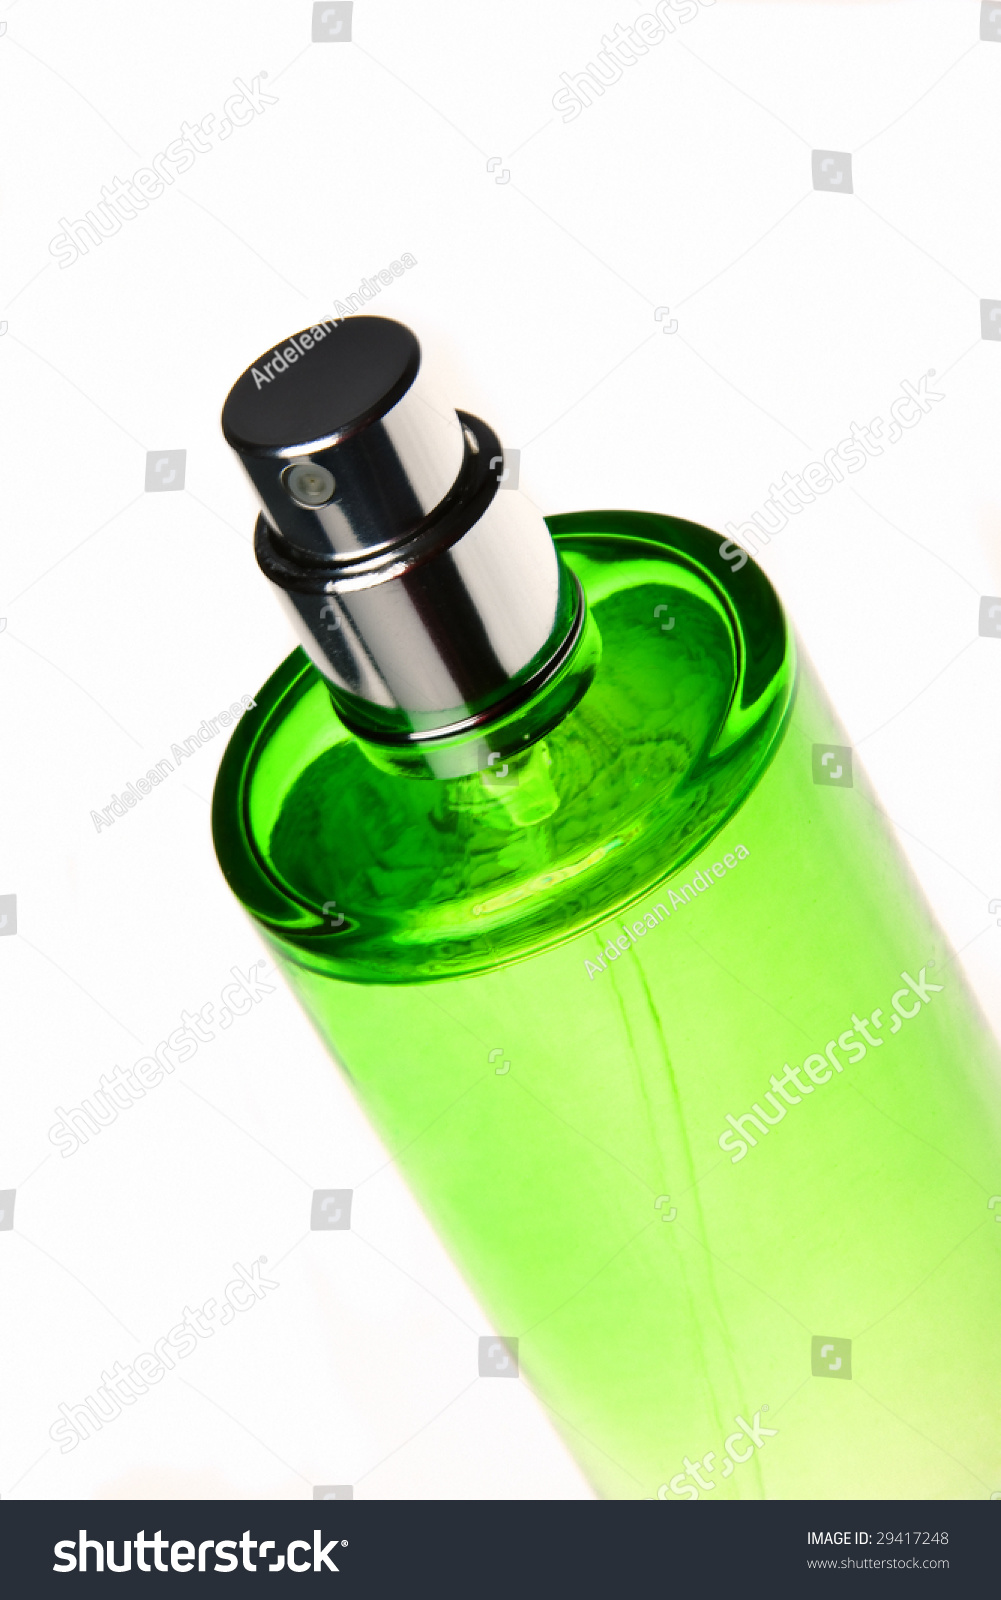 Stock Photo A Single Green Bottle Of Perfume Isolated On White 29417248 